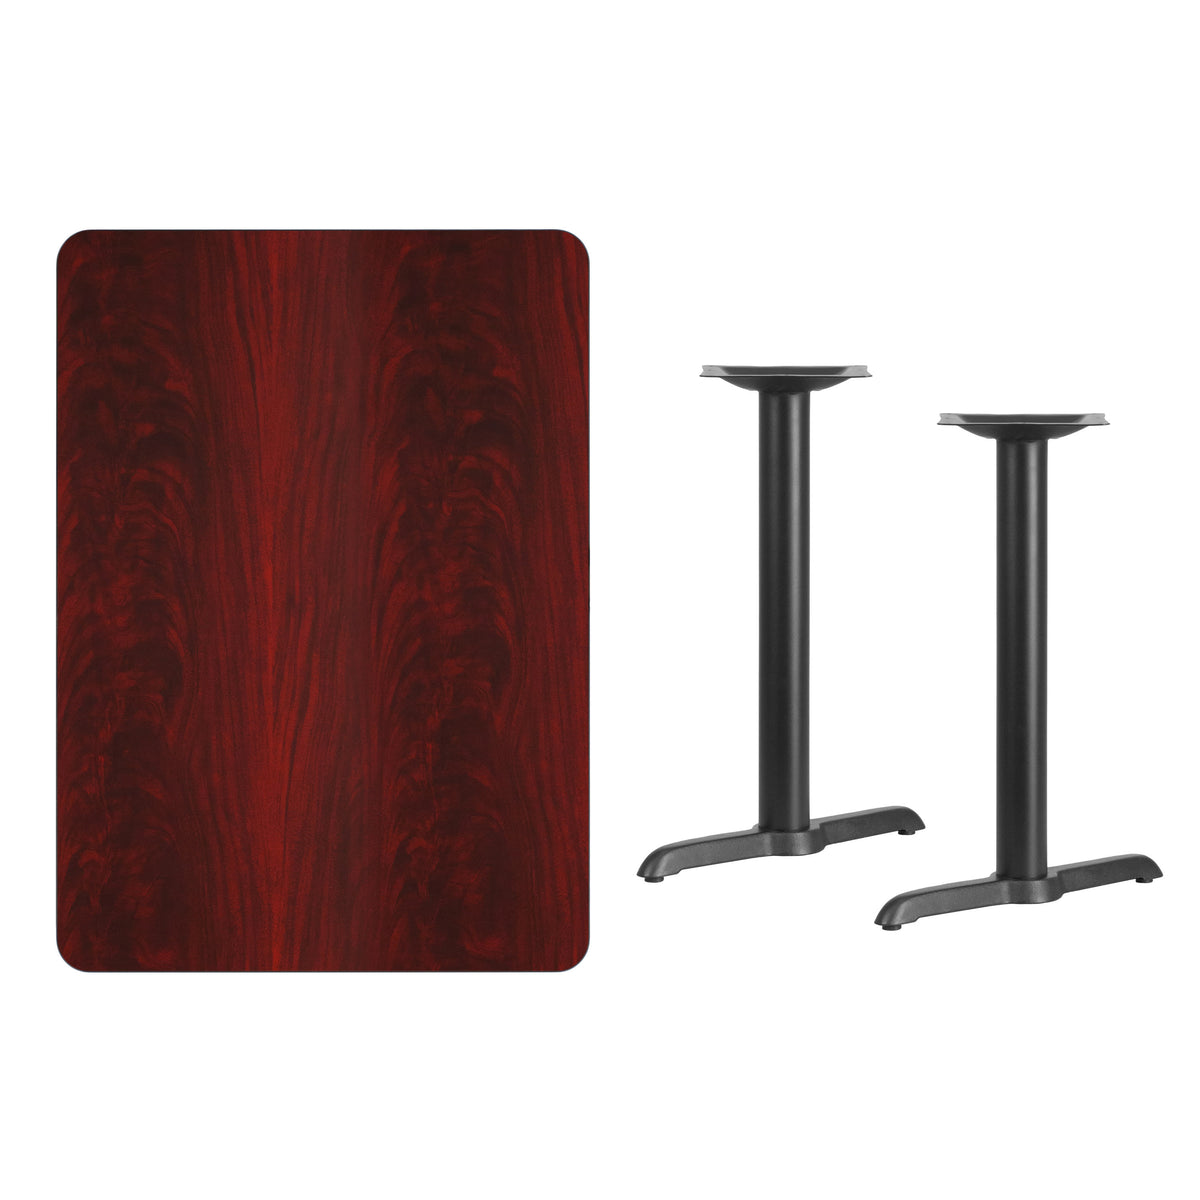 Mahogany |#| 30inch x 42inch Mahogany Laminate Table Top with 5inch x 22inch Table Height Bases